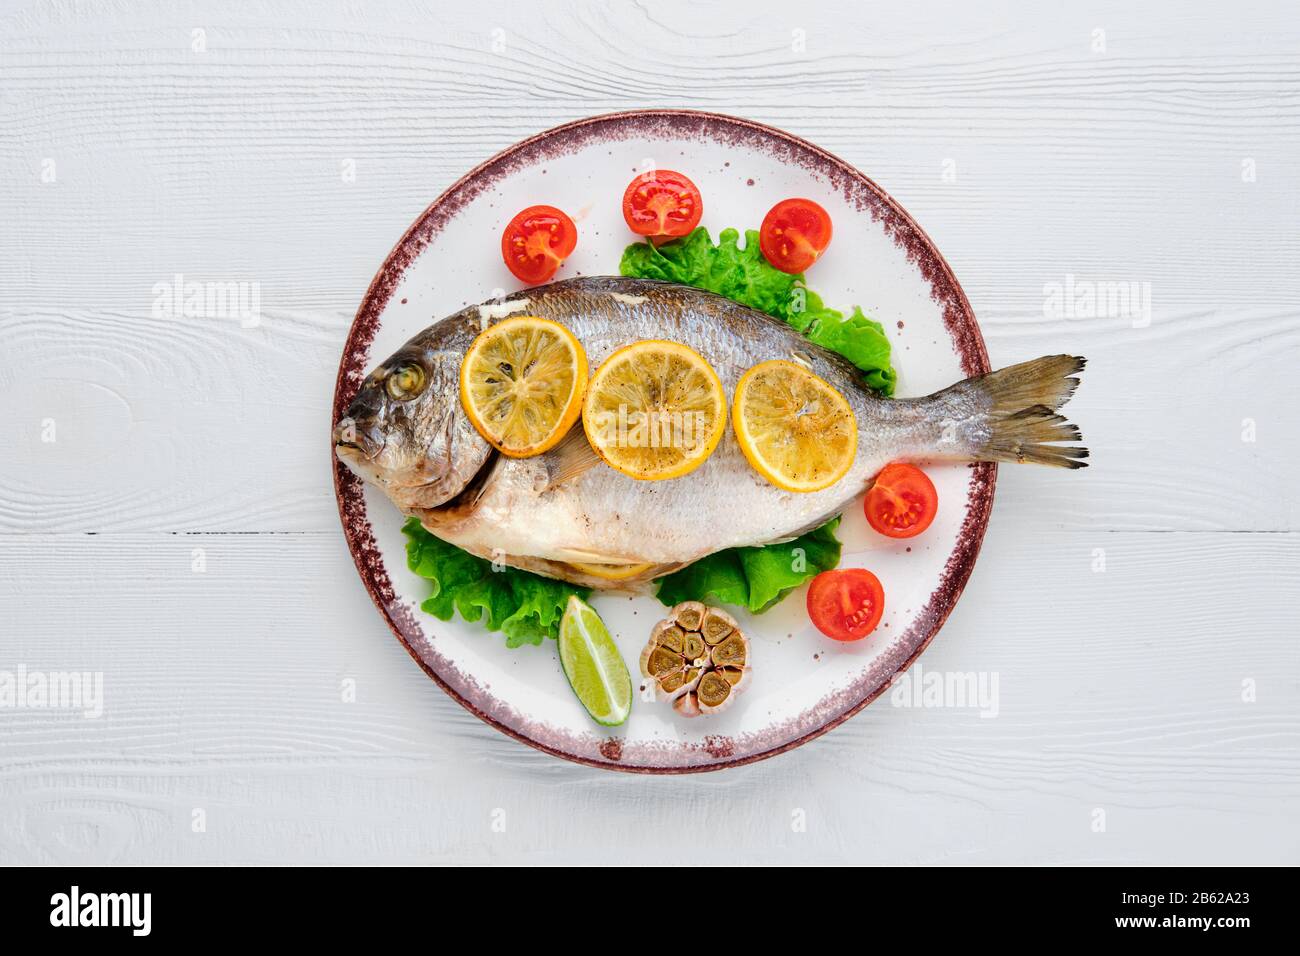 Overhead view of gilt head bream baked in oven Stock Photo